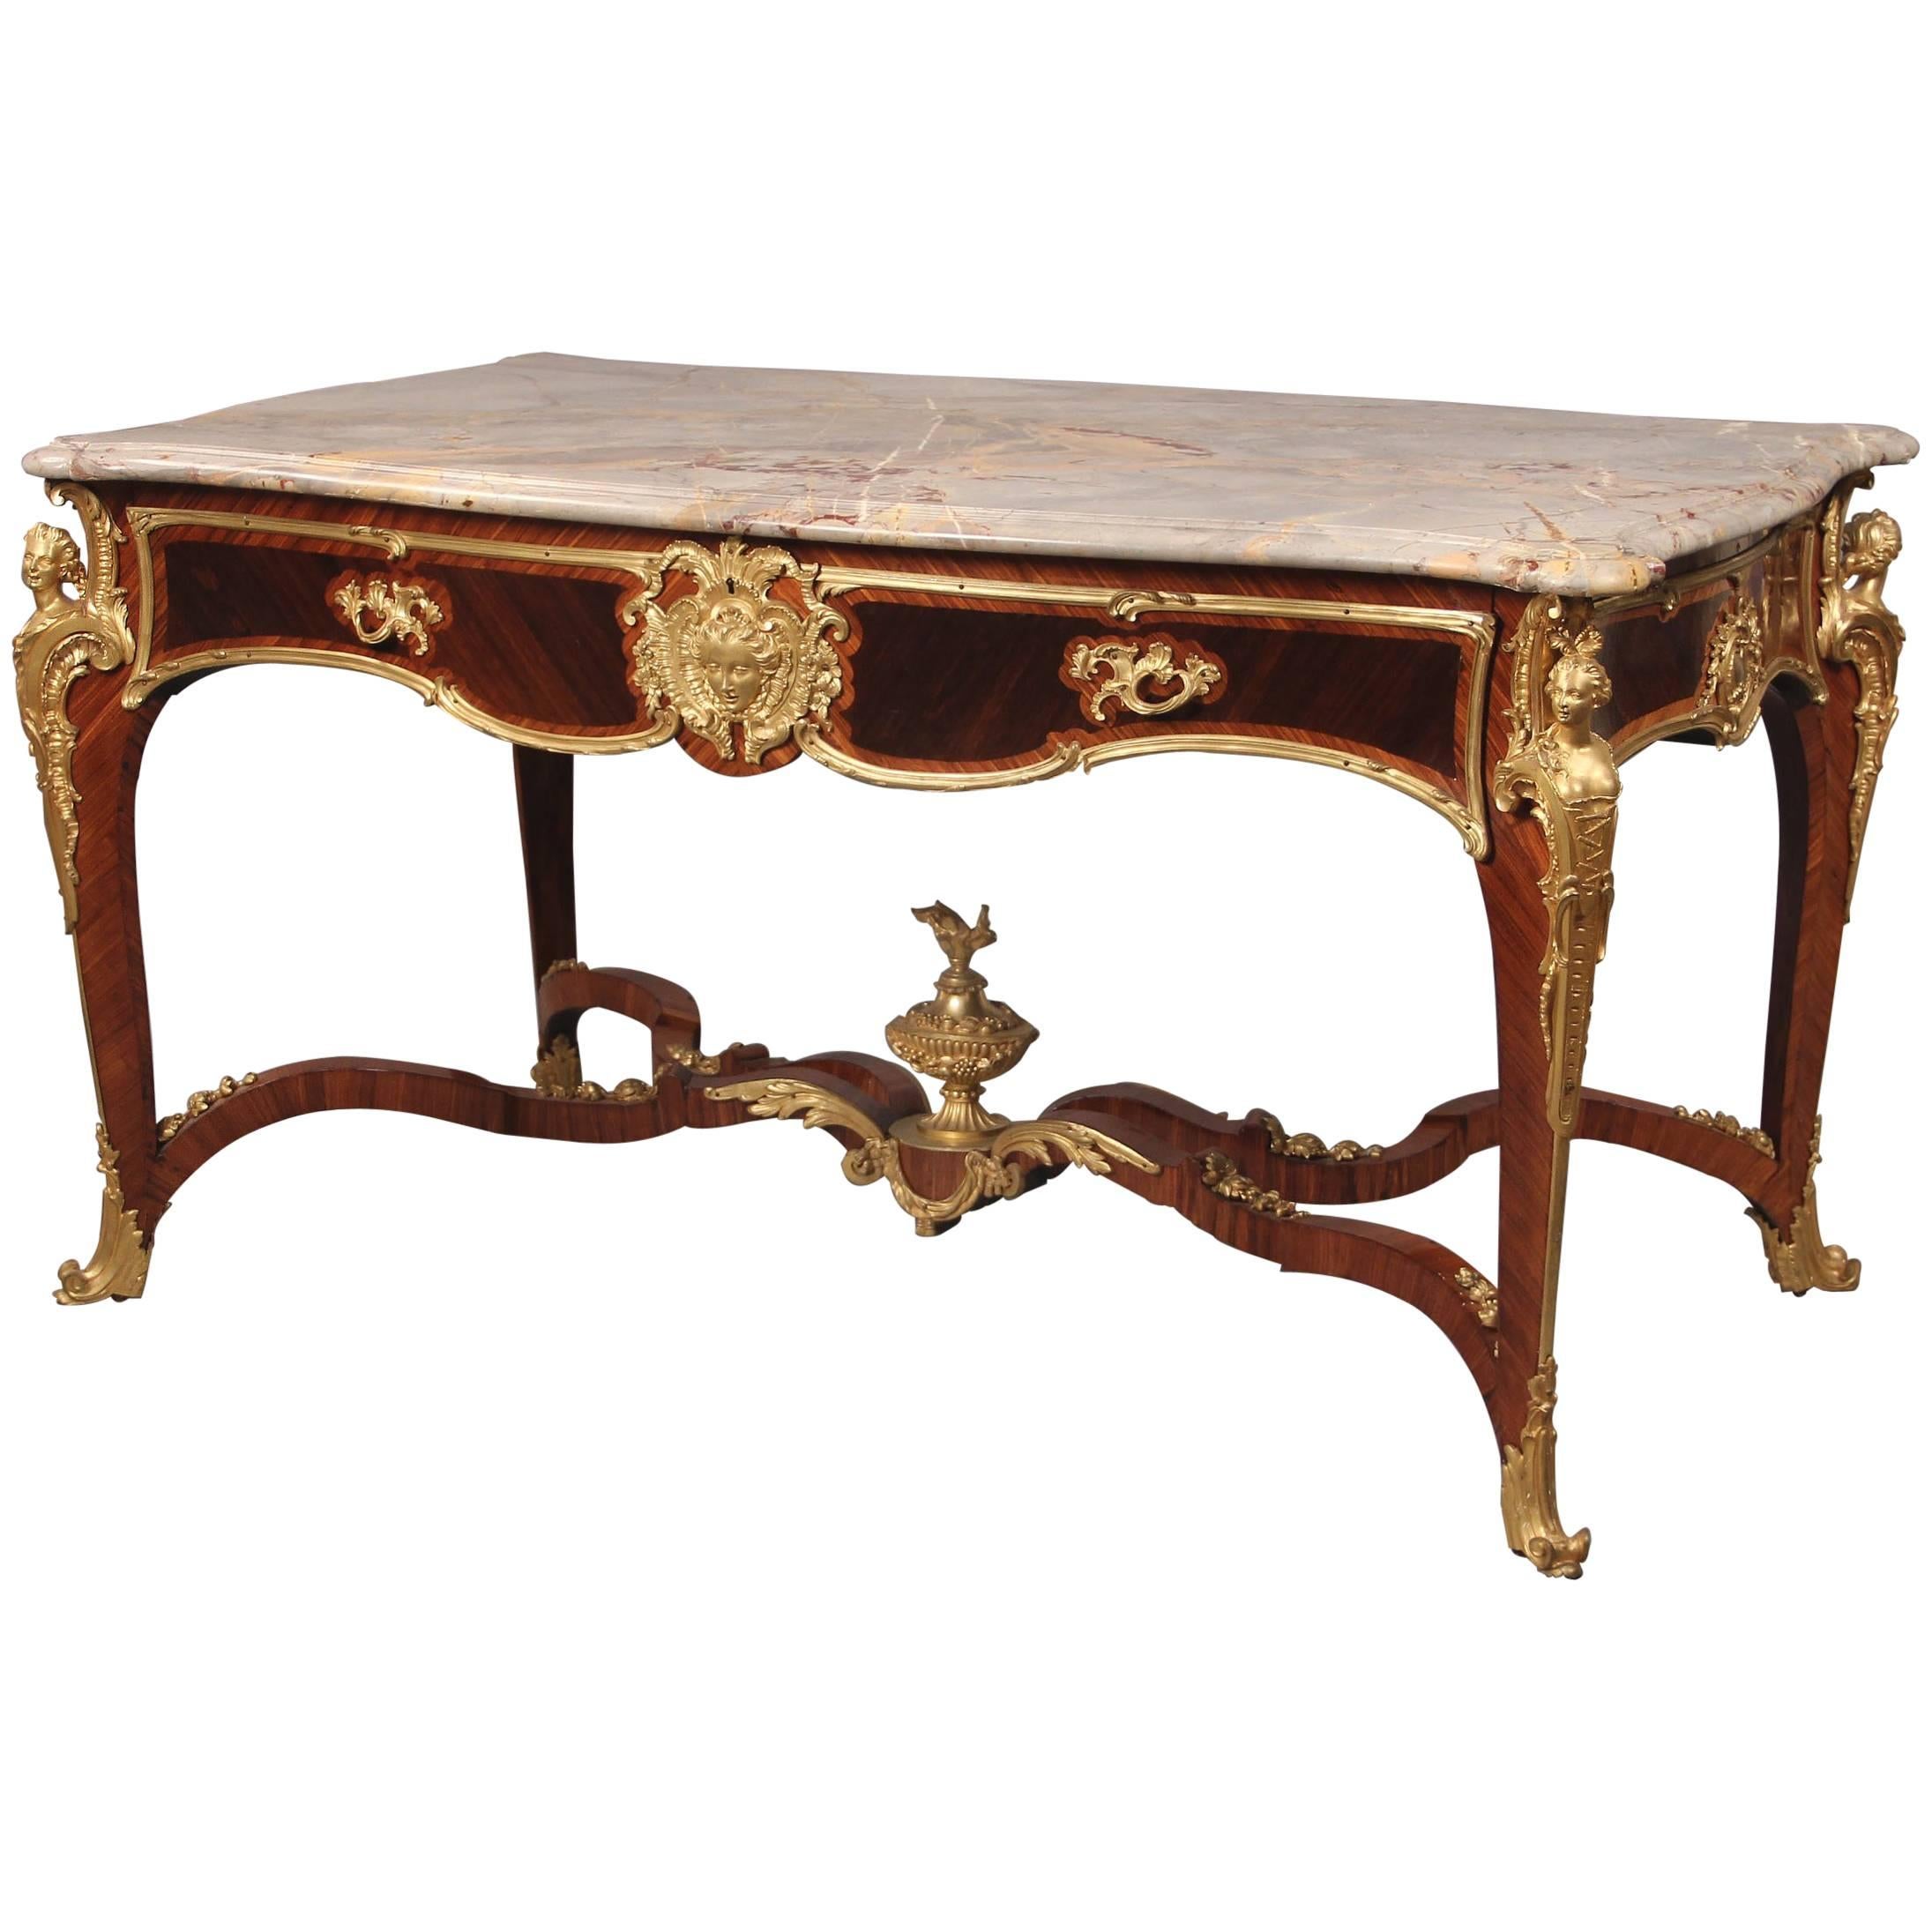 Fantastic Late 19th Century Gilt Bronze Mounted Centre Table by François Linke